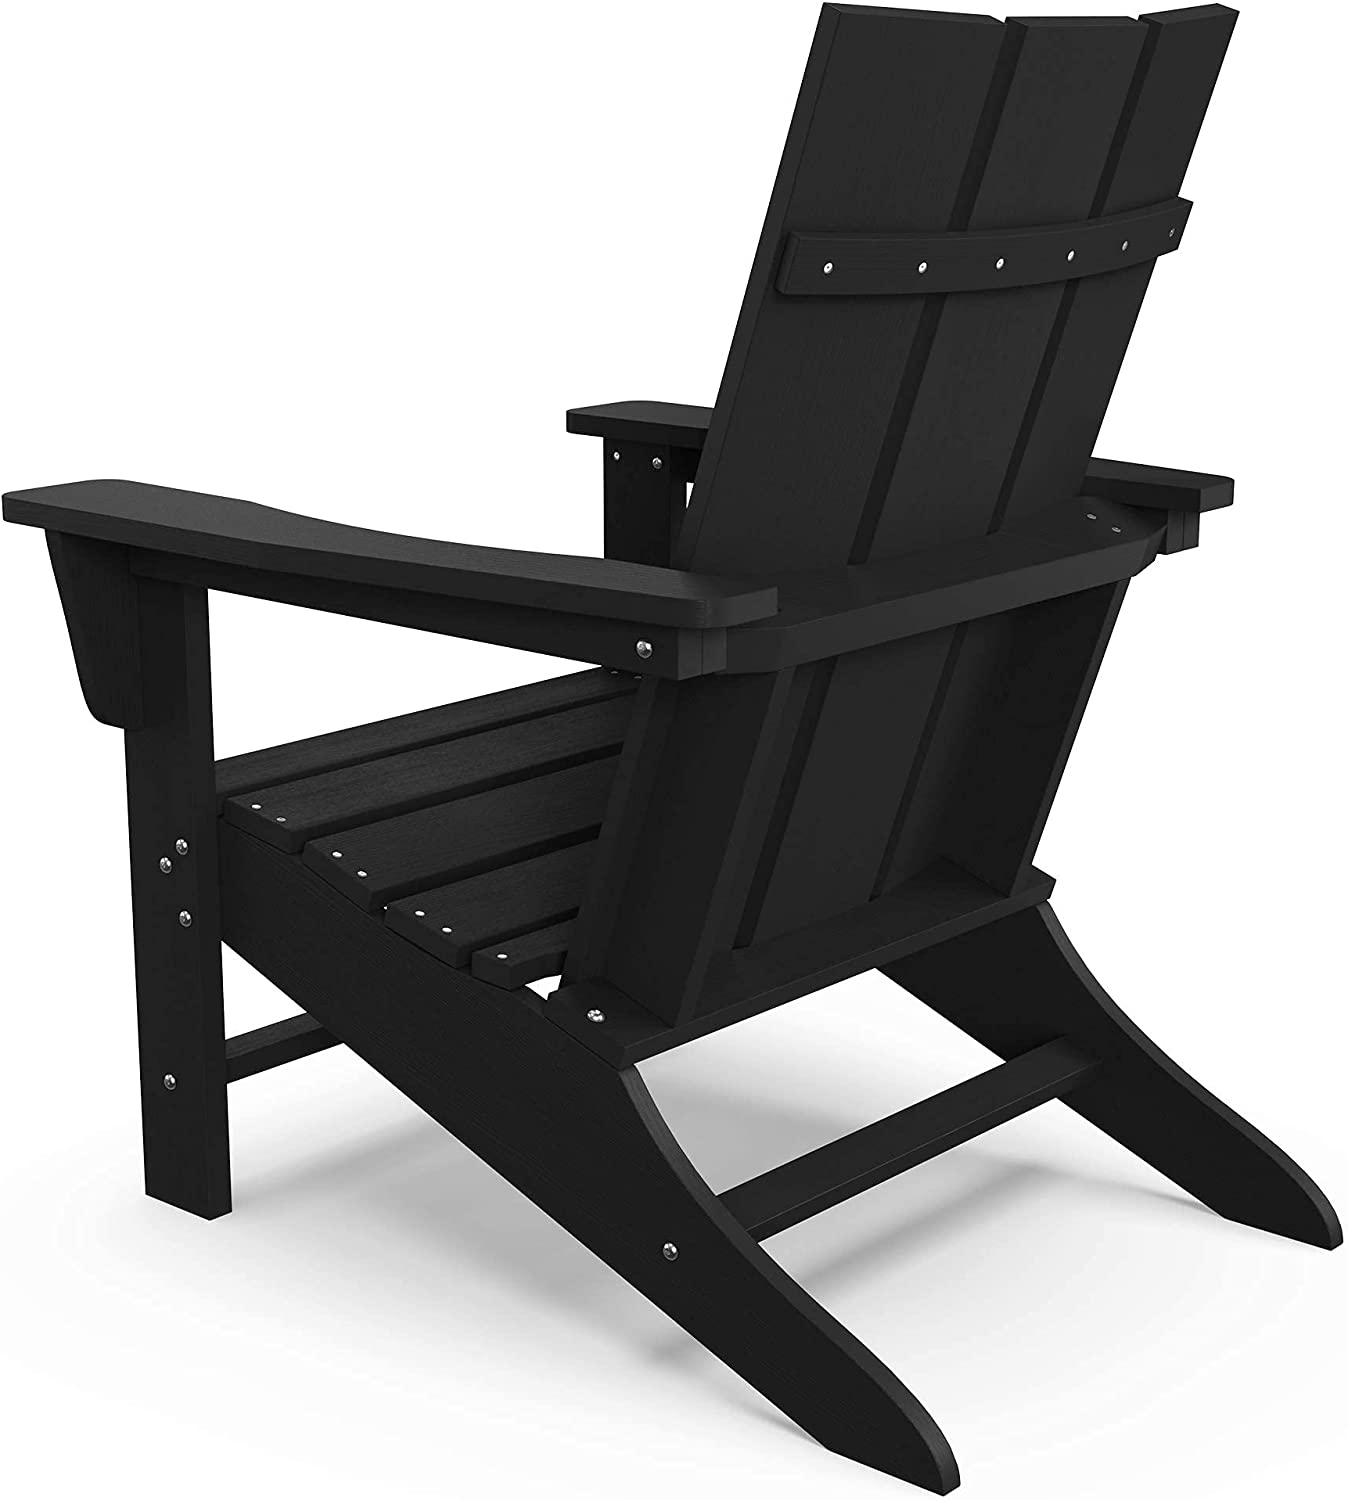 SERWALL Adirondack Chair Plastic Outdoor Classic Chair Weather Resistant - Black - $80